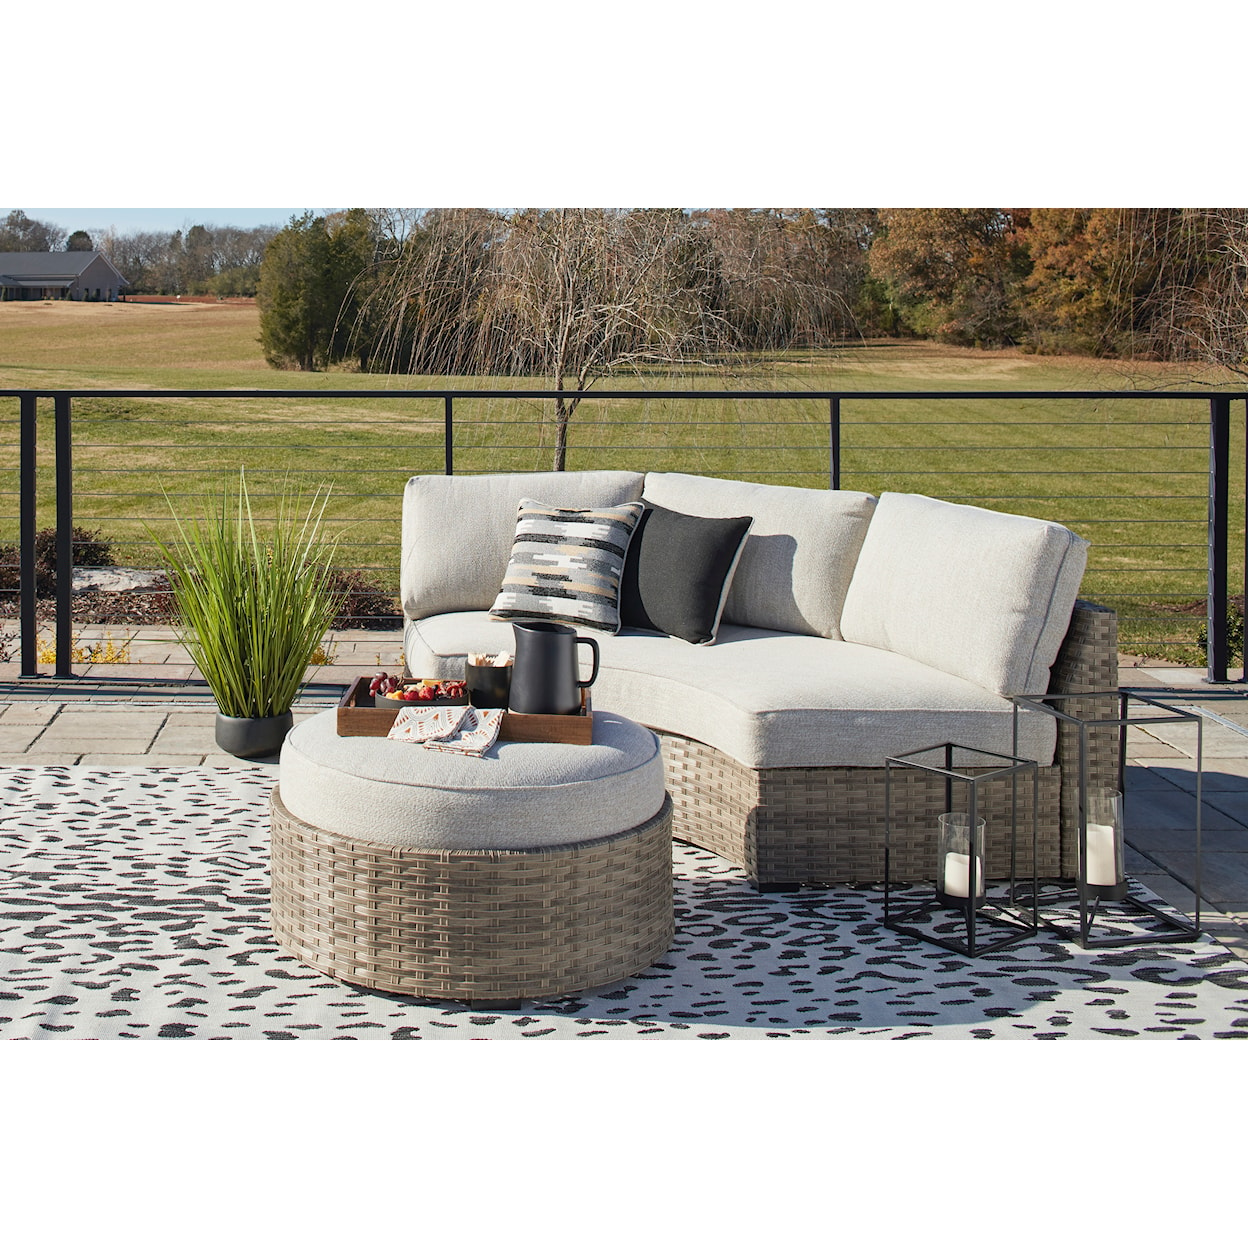 Signature Design Calworth Outdoor Curved Loveseat with Cushion